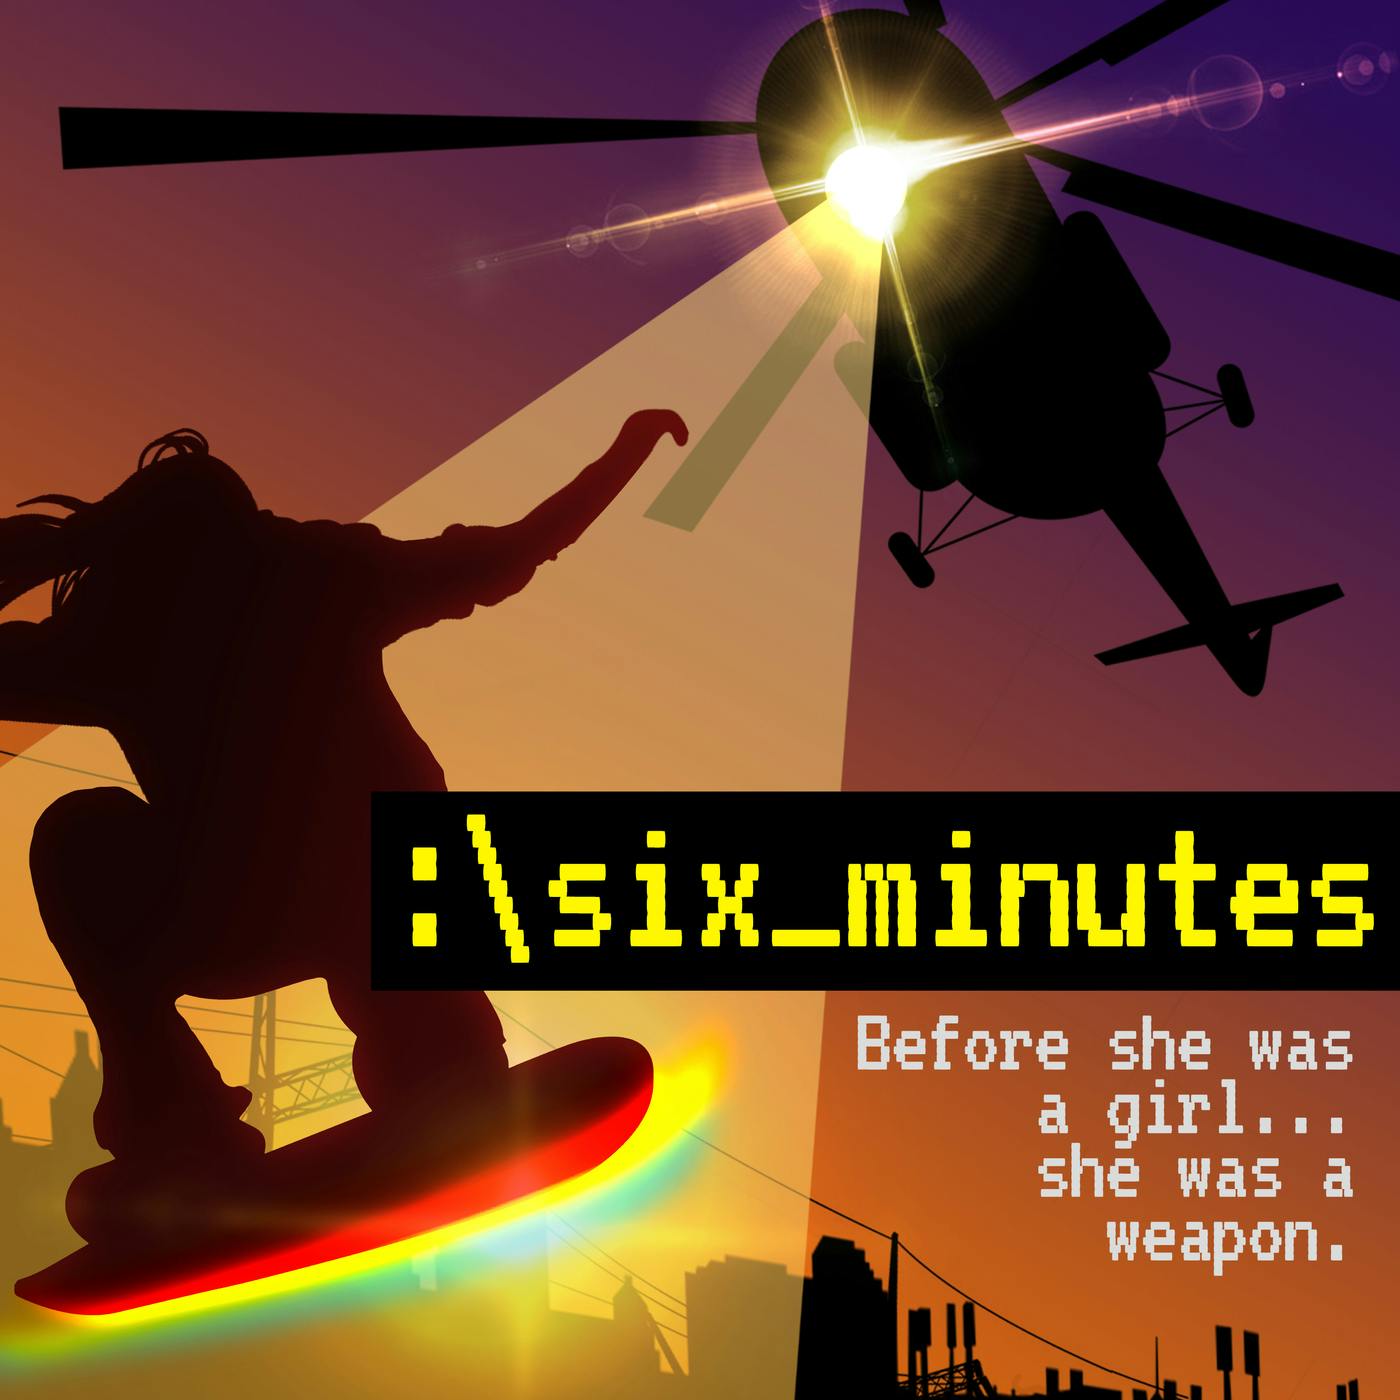 S1 E2: Six Minutes without a Past